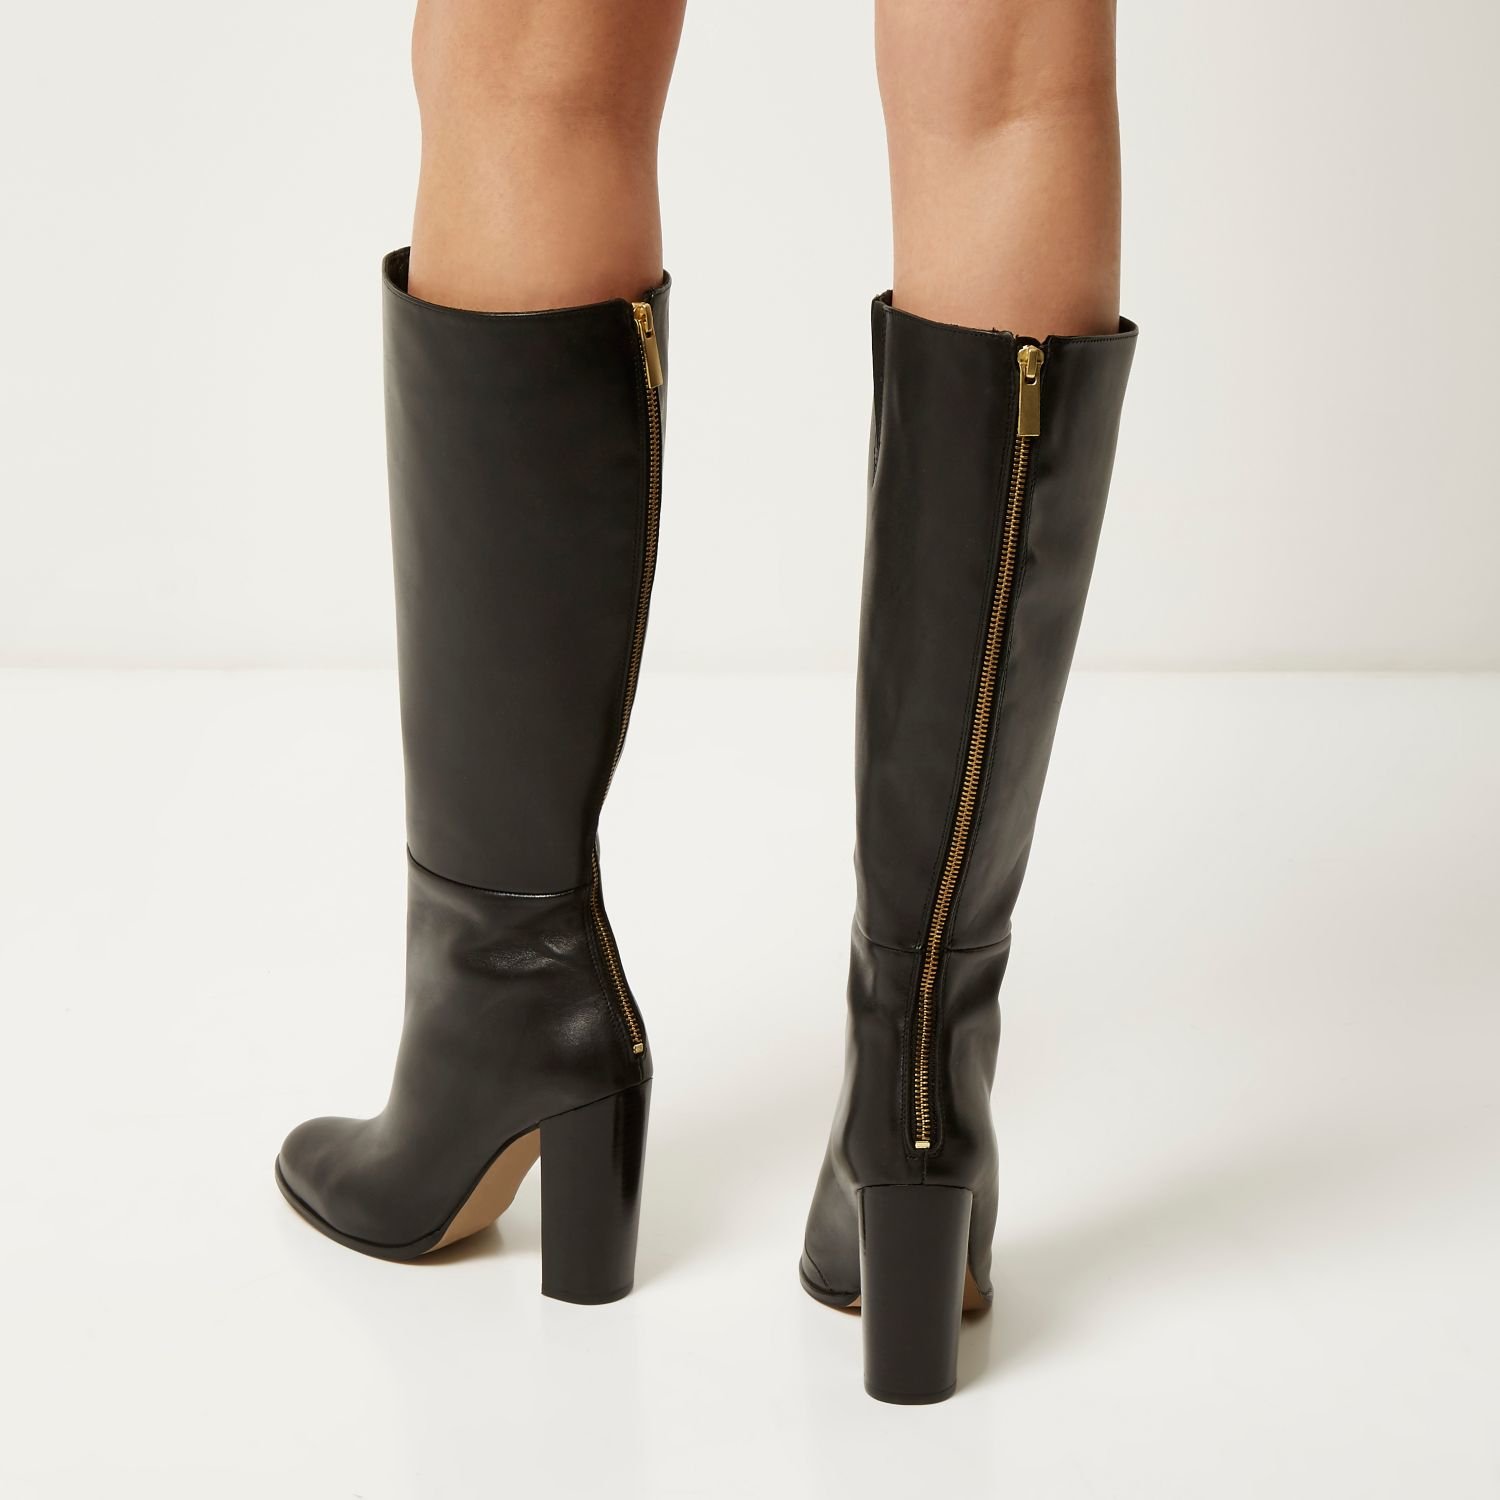 Lyst - River Island Black Leather Knee High Heeled Boots in Black